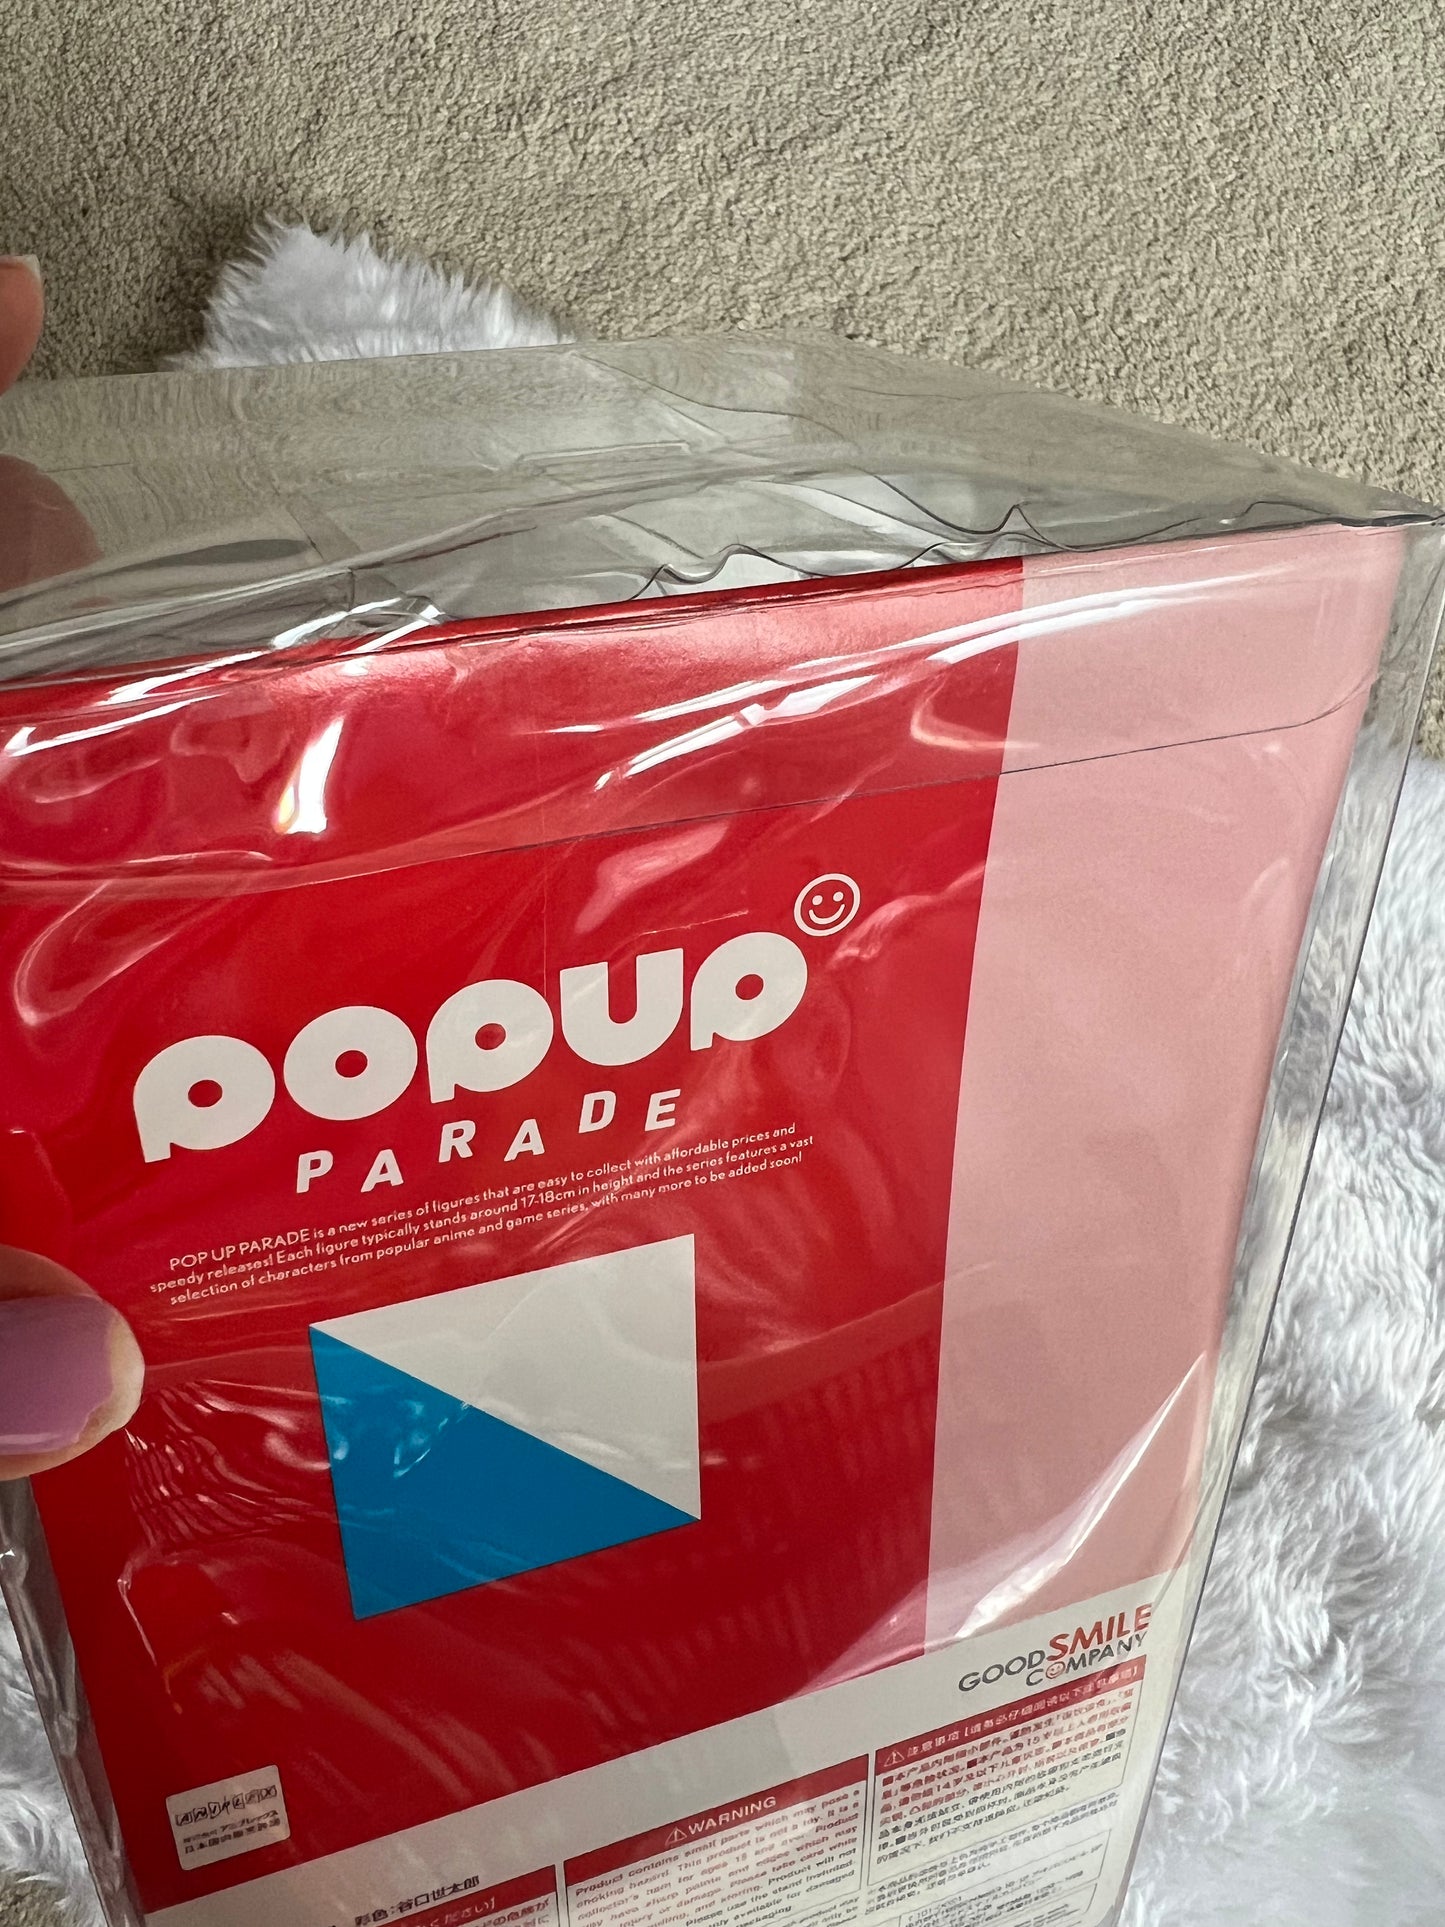 SALE - DARLING in the FRANXX Zero Two - Pop Up Parade - Box is DAMAGED